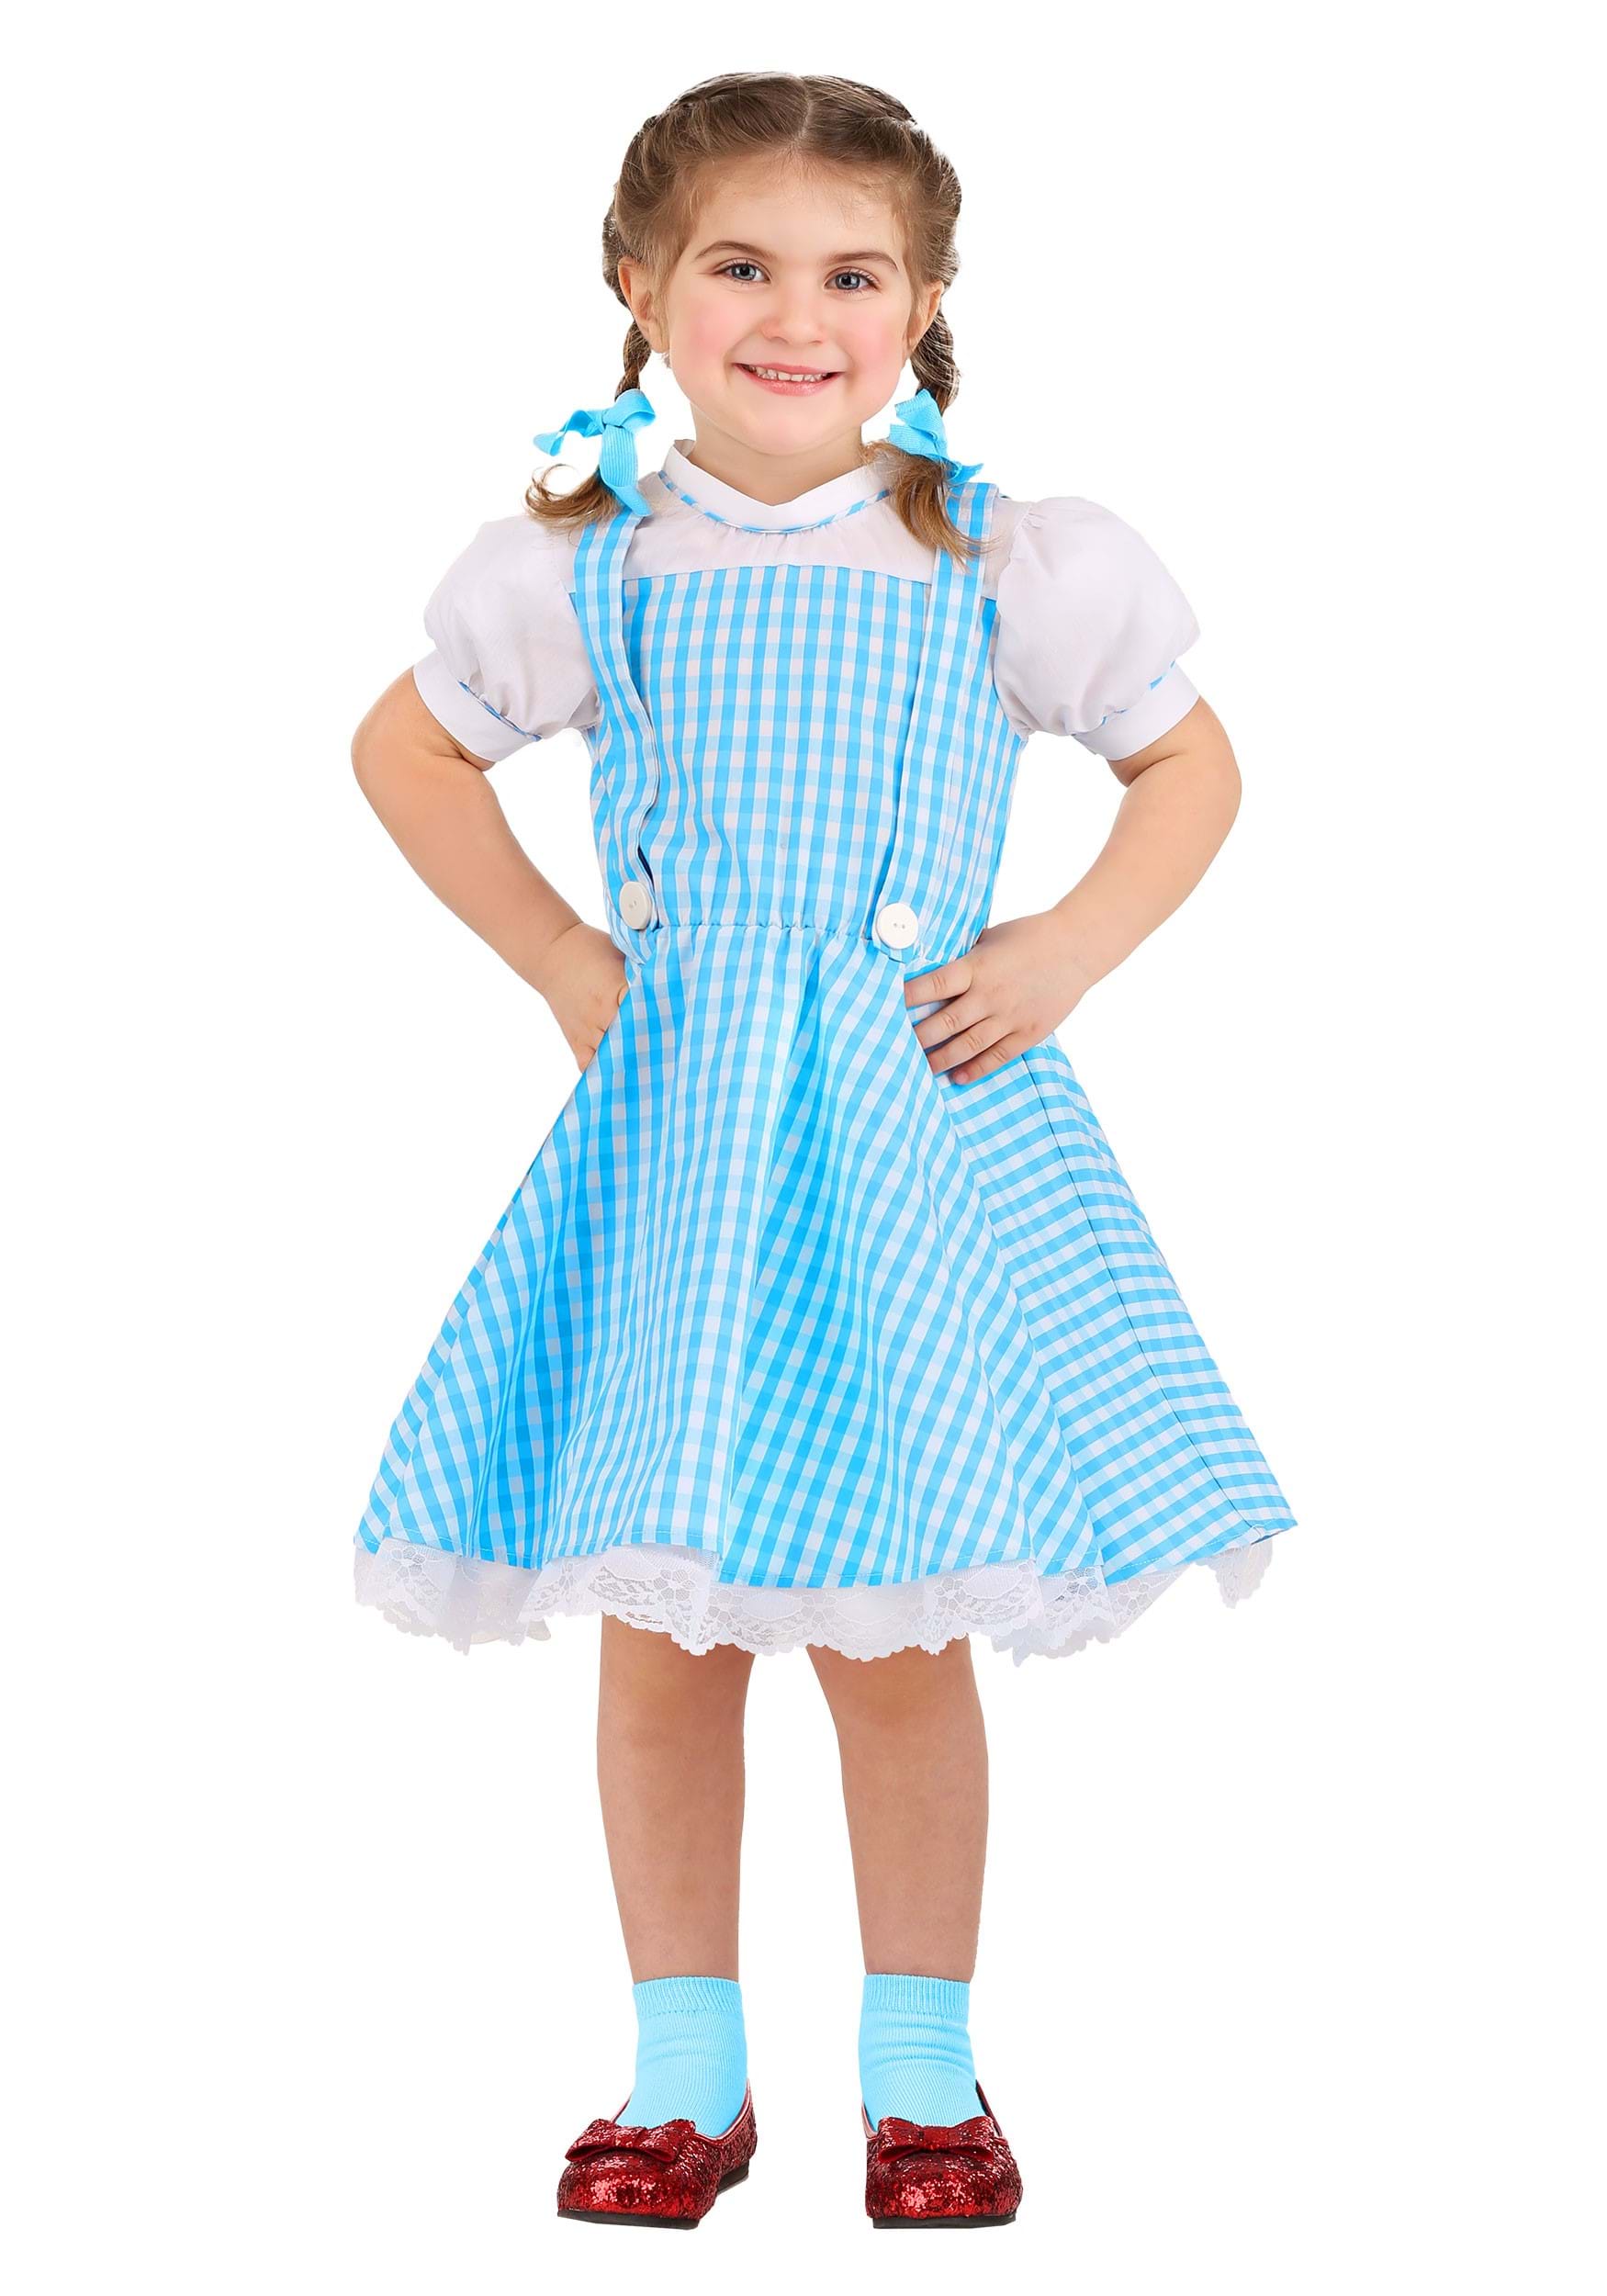 Classic Dorothy Wizard of Oz Costume for Toddlers